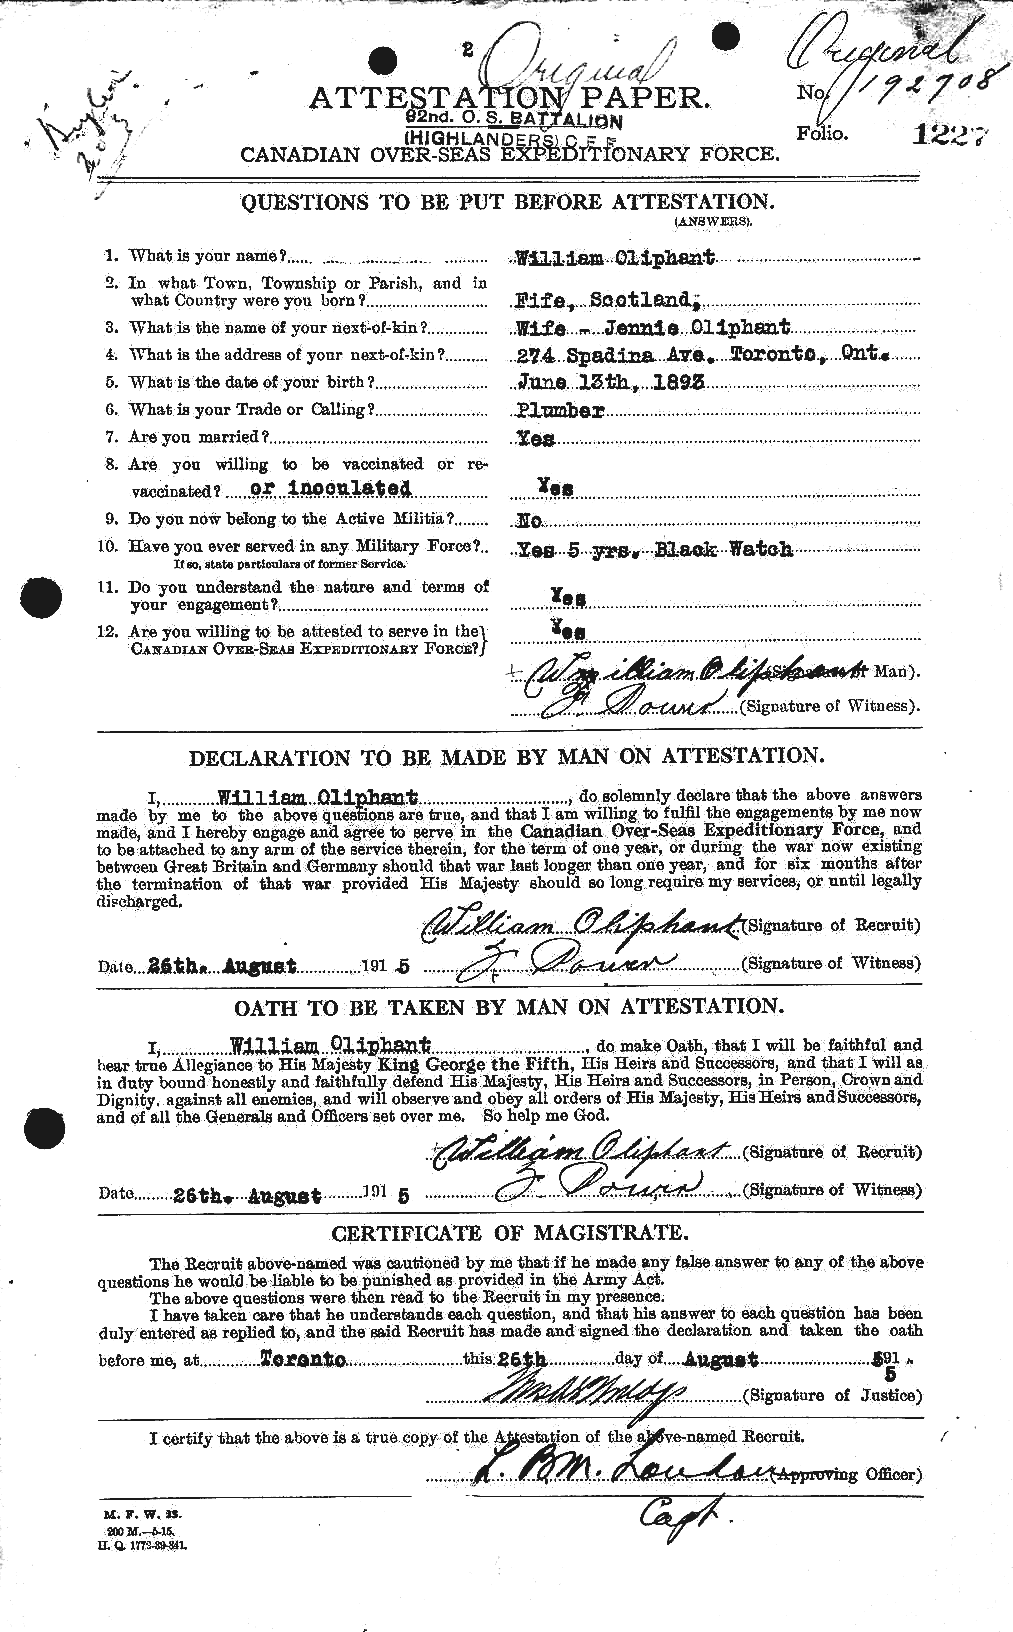 Personnel Records of the First World War - CEF 557070a